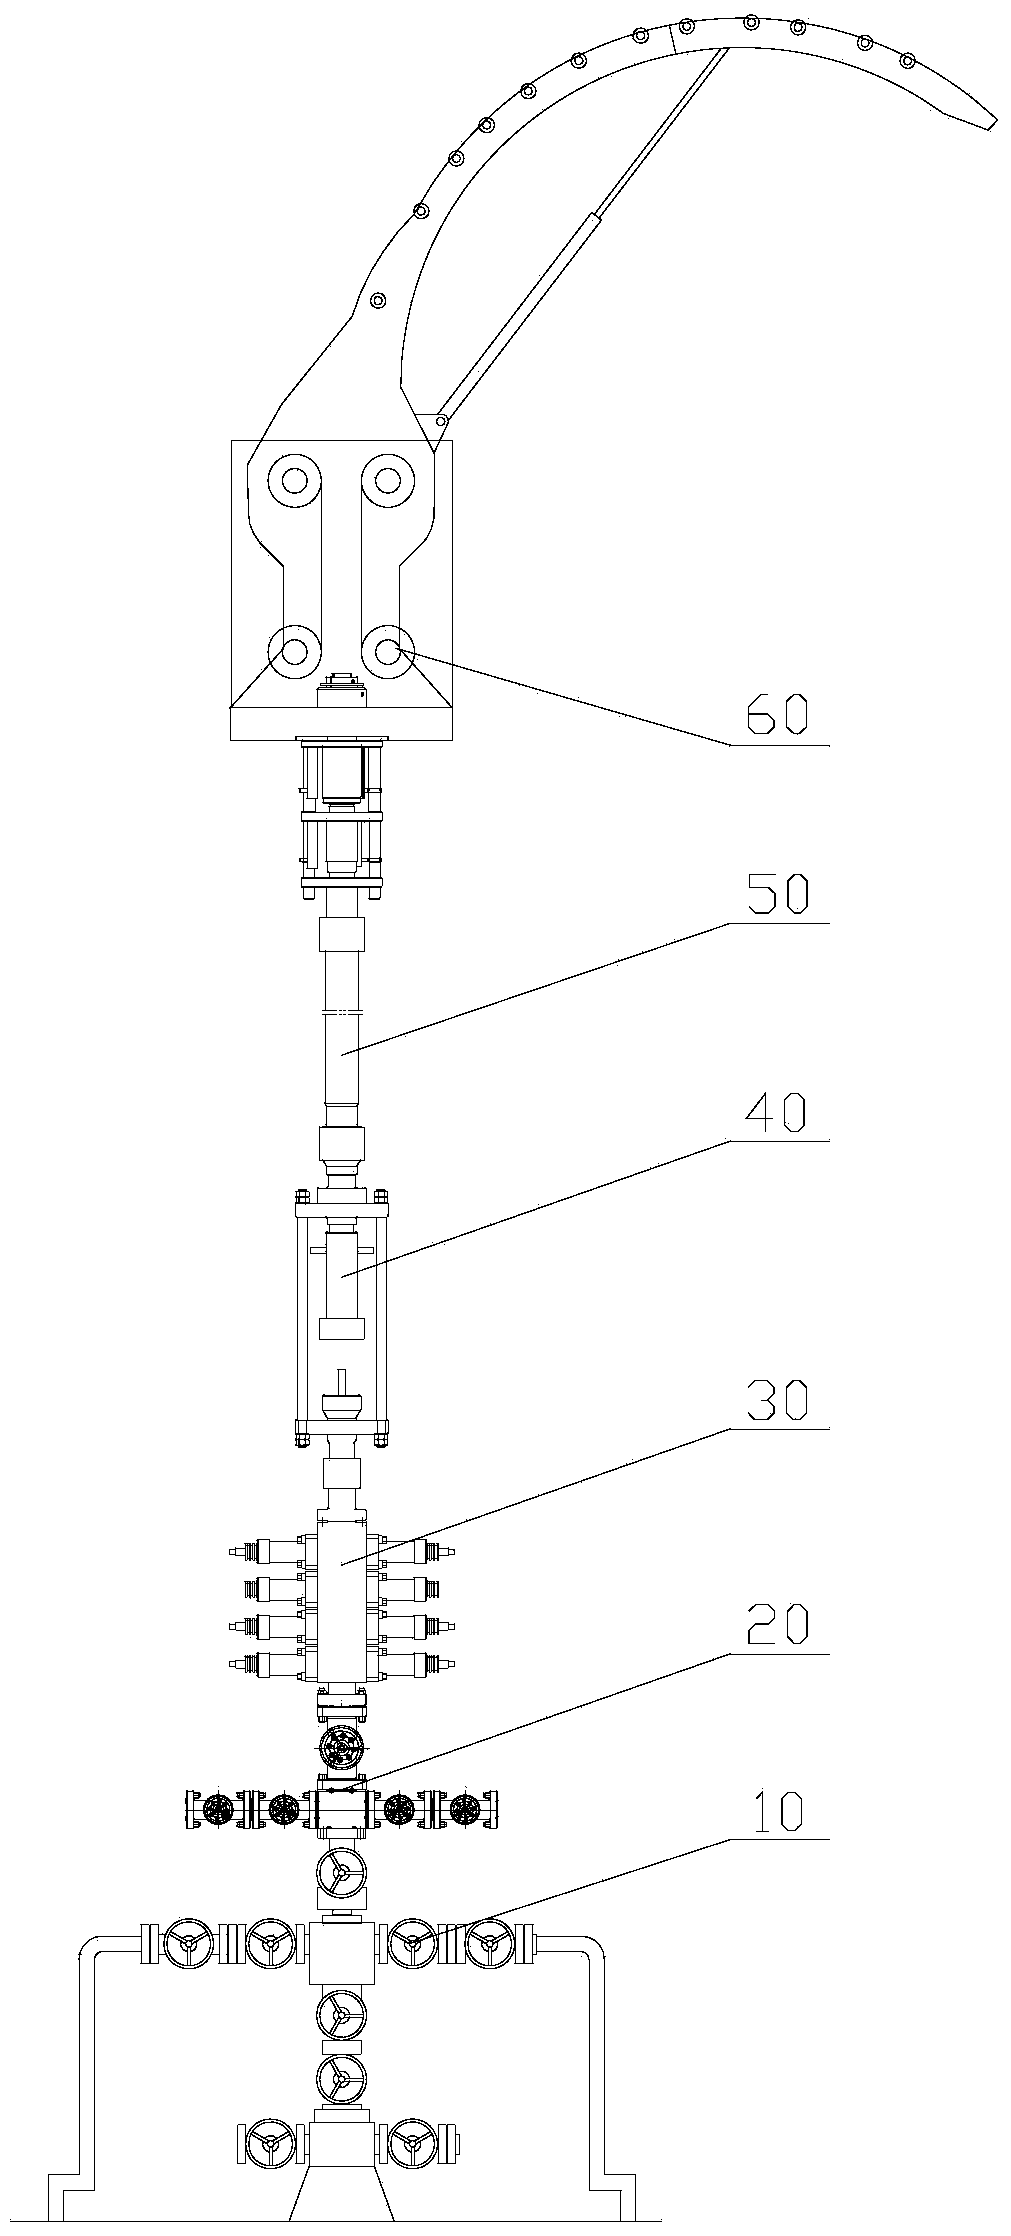 Method for suspending speed tubular column of continuous oil tube